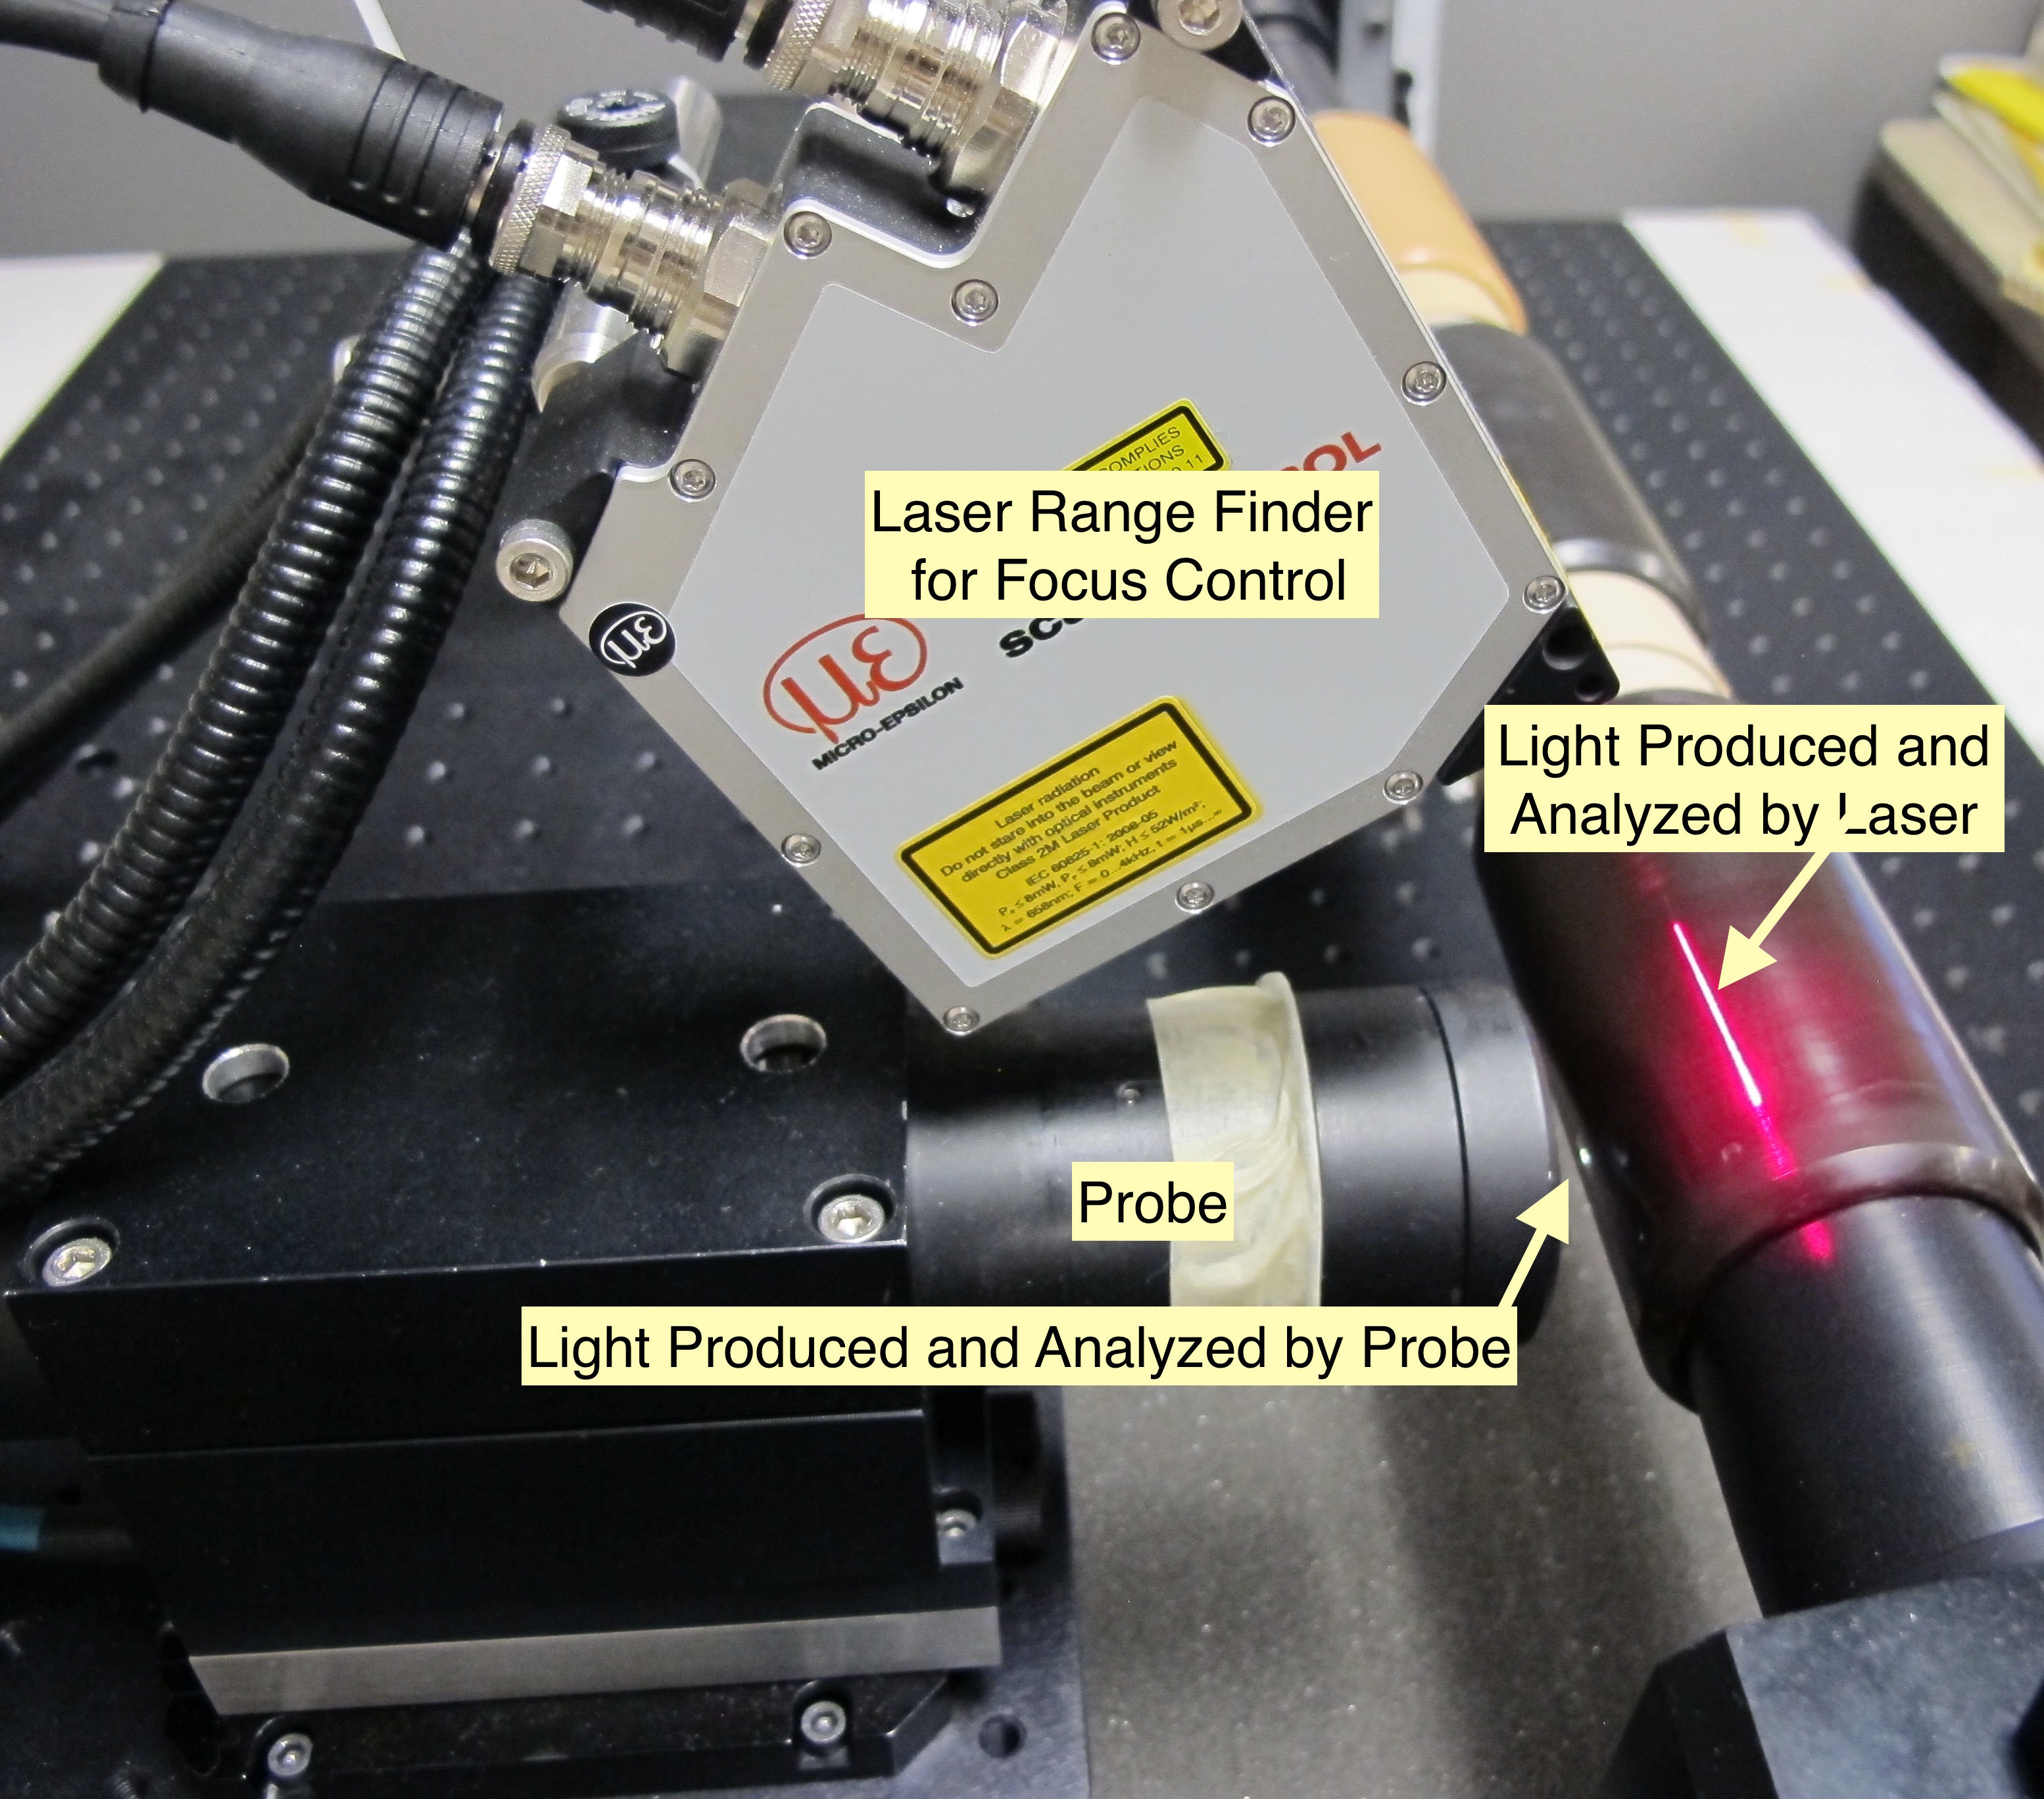 Laser and probe annotated